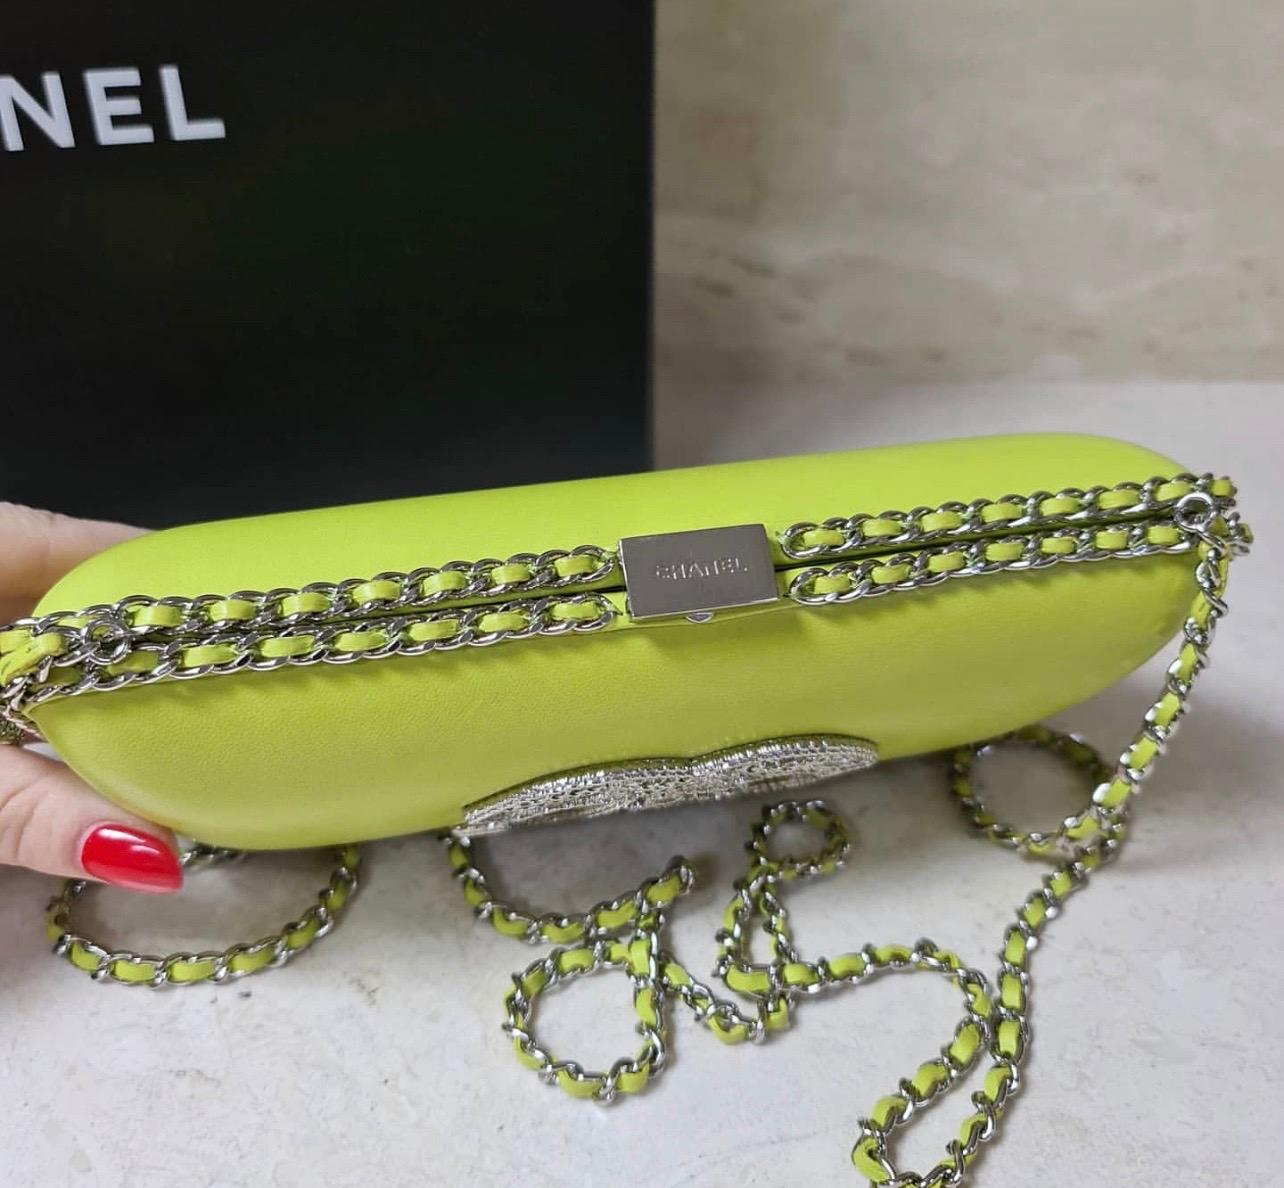 Chanel Lime Green Leather Kiss Lock Clutch Crossbody
Embellished by CC brooch.
Chain around.
Very rare item.
Condition is very good.
Comes with dust bag.
For buyers from EU we can provide shipping from Poland. Please demand if you need.